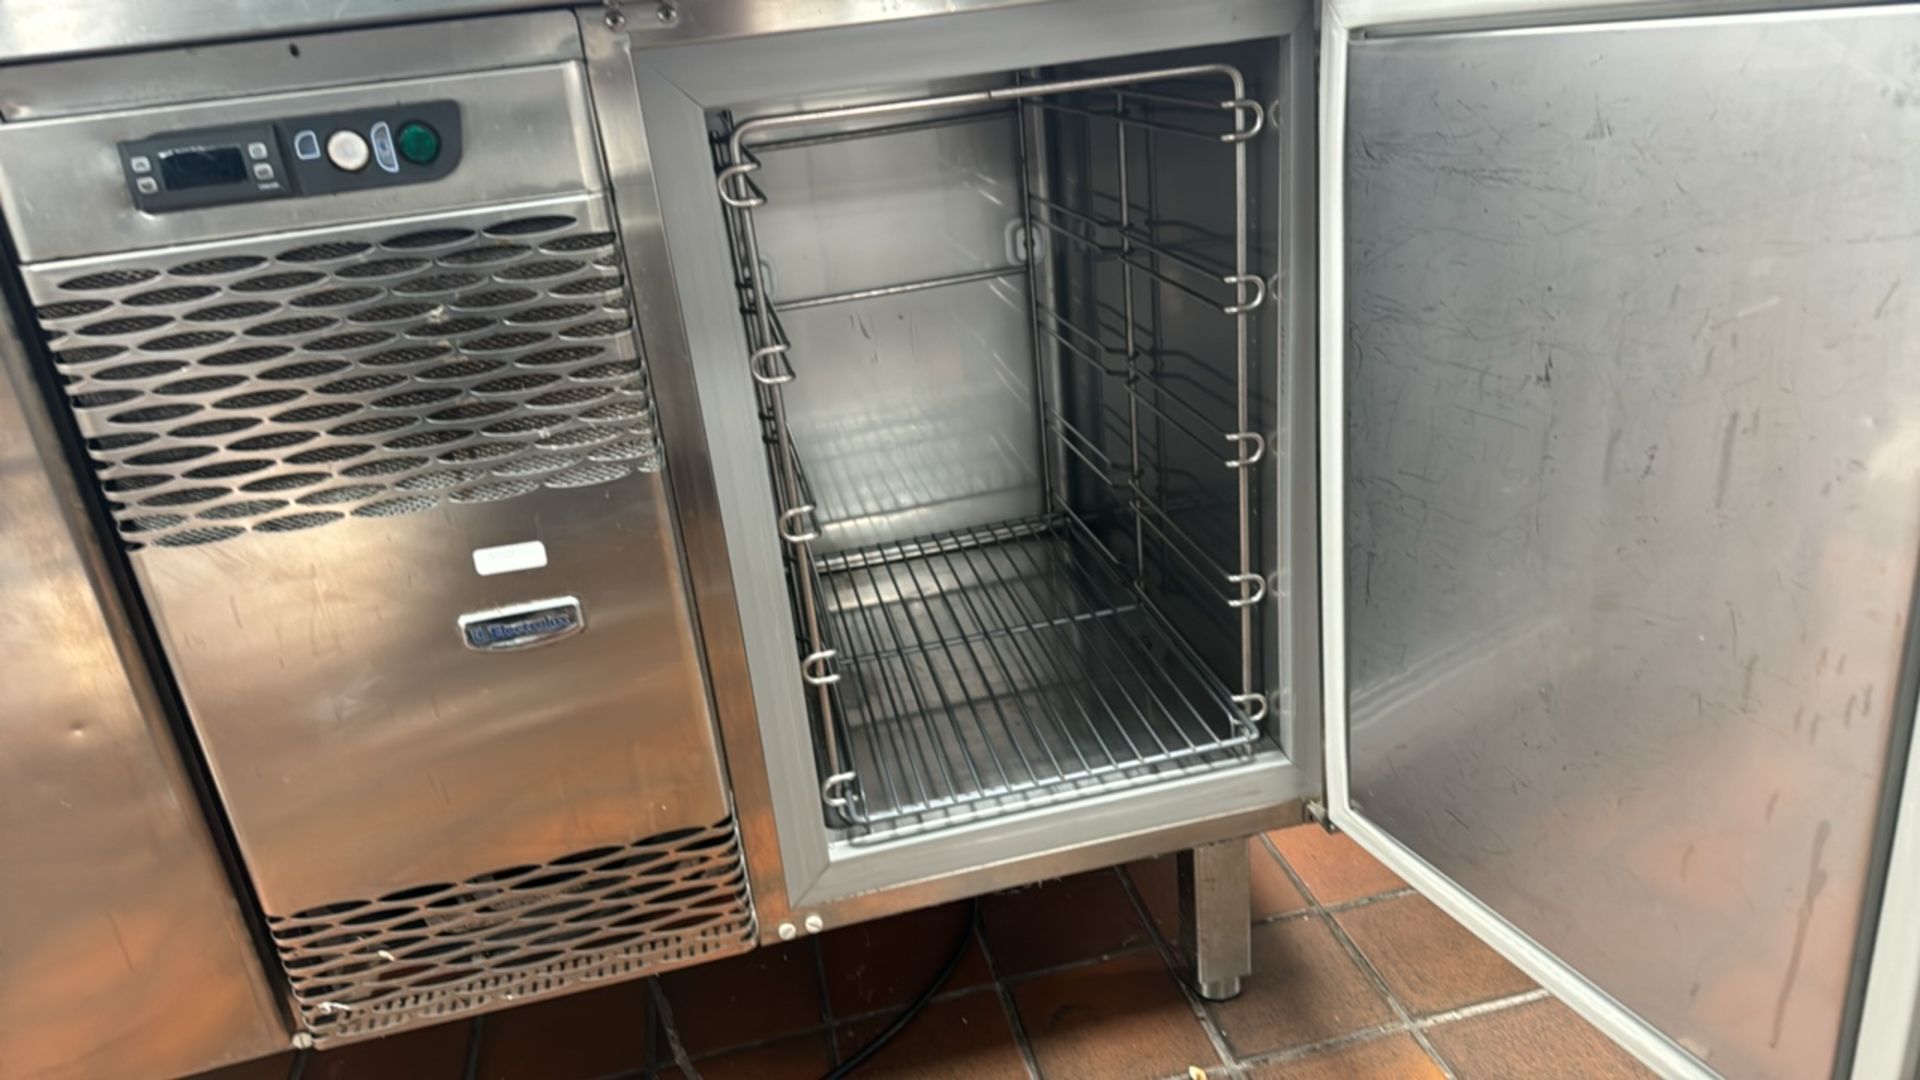 Electrolux Stainless Steel Preparation Unit With Under Counter Fridges - Image 9 of 9